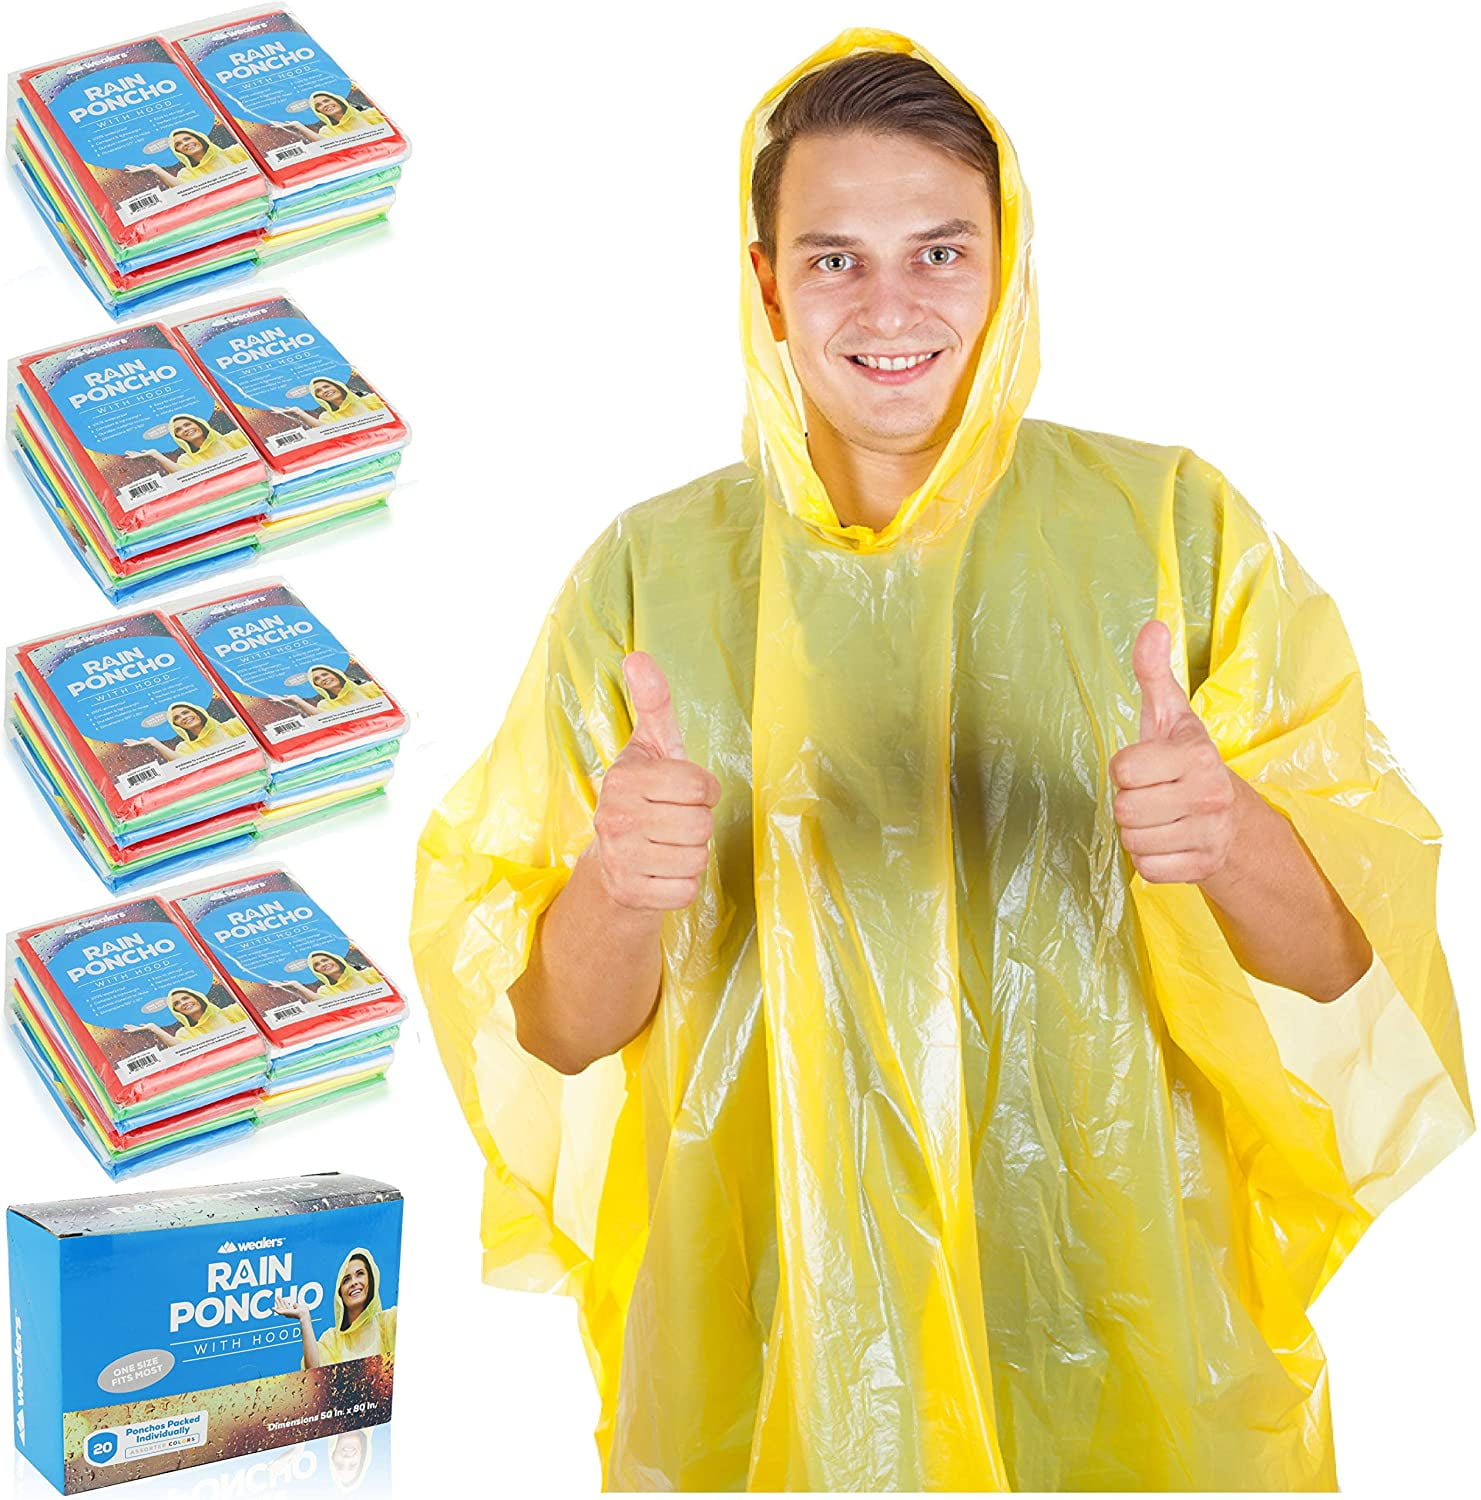 Emergency Disposable Rain Ponchos 5 Clear, 30 Pack or 200 Pack 10 